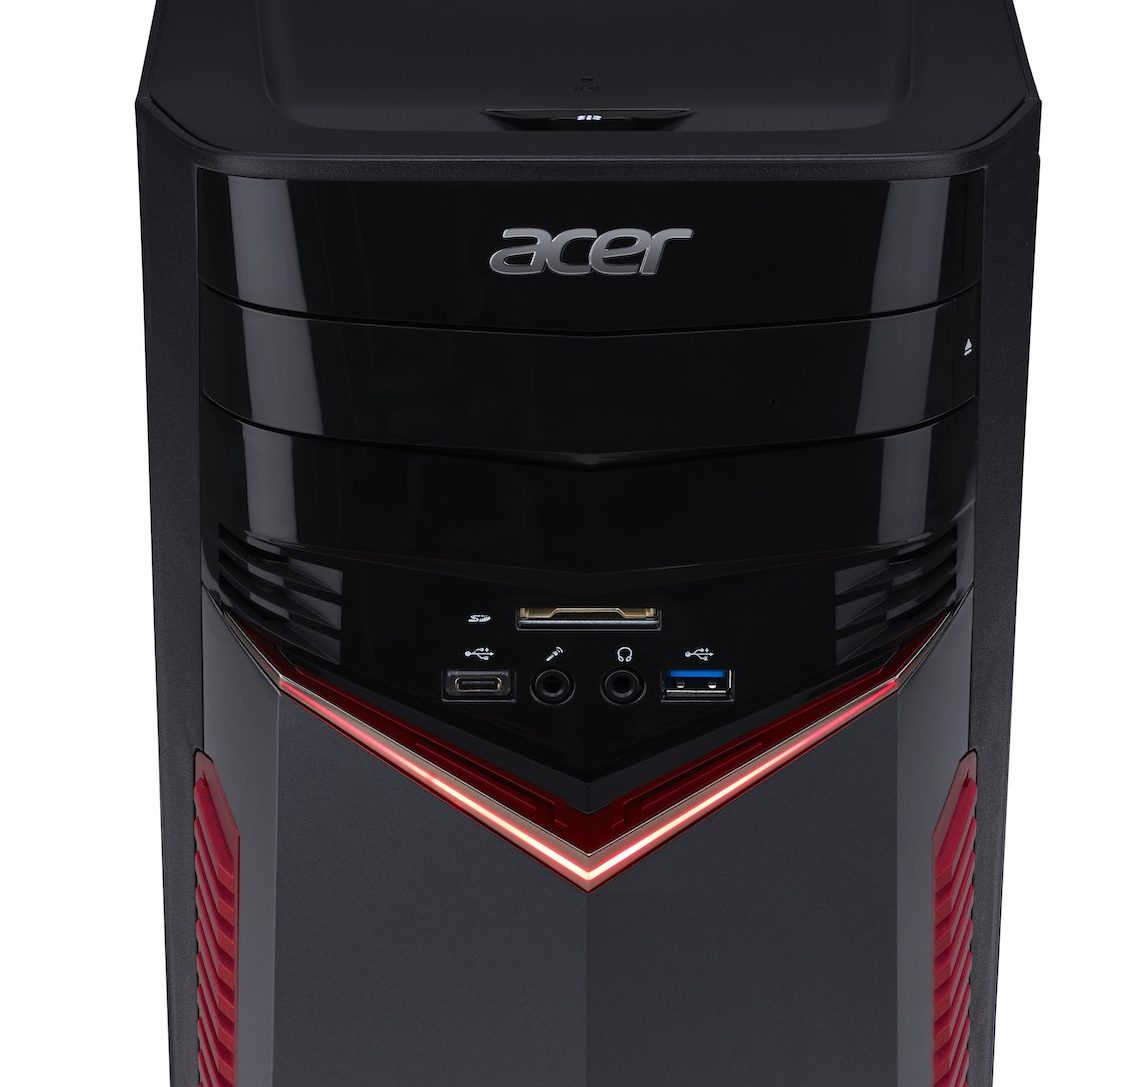 nægte undgå kjole CES 2017: Acer's Aspire GX Gaming Desktop Comes With A Kaby Lake CPU -  Lowyat.NET